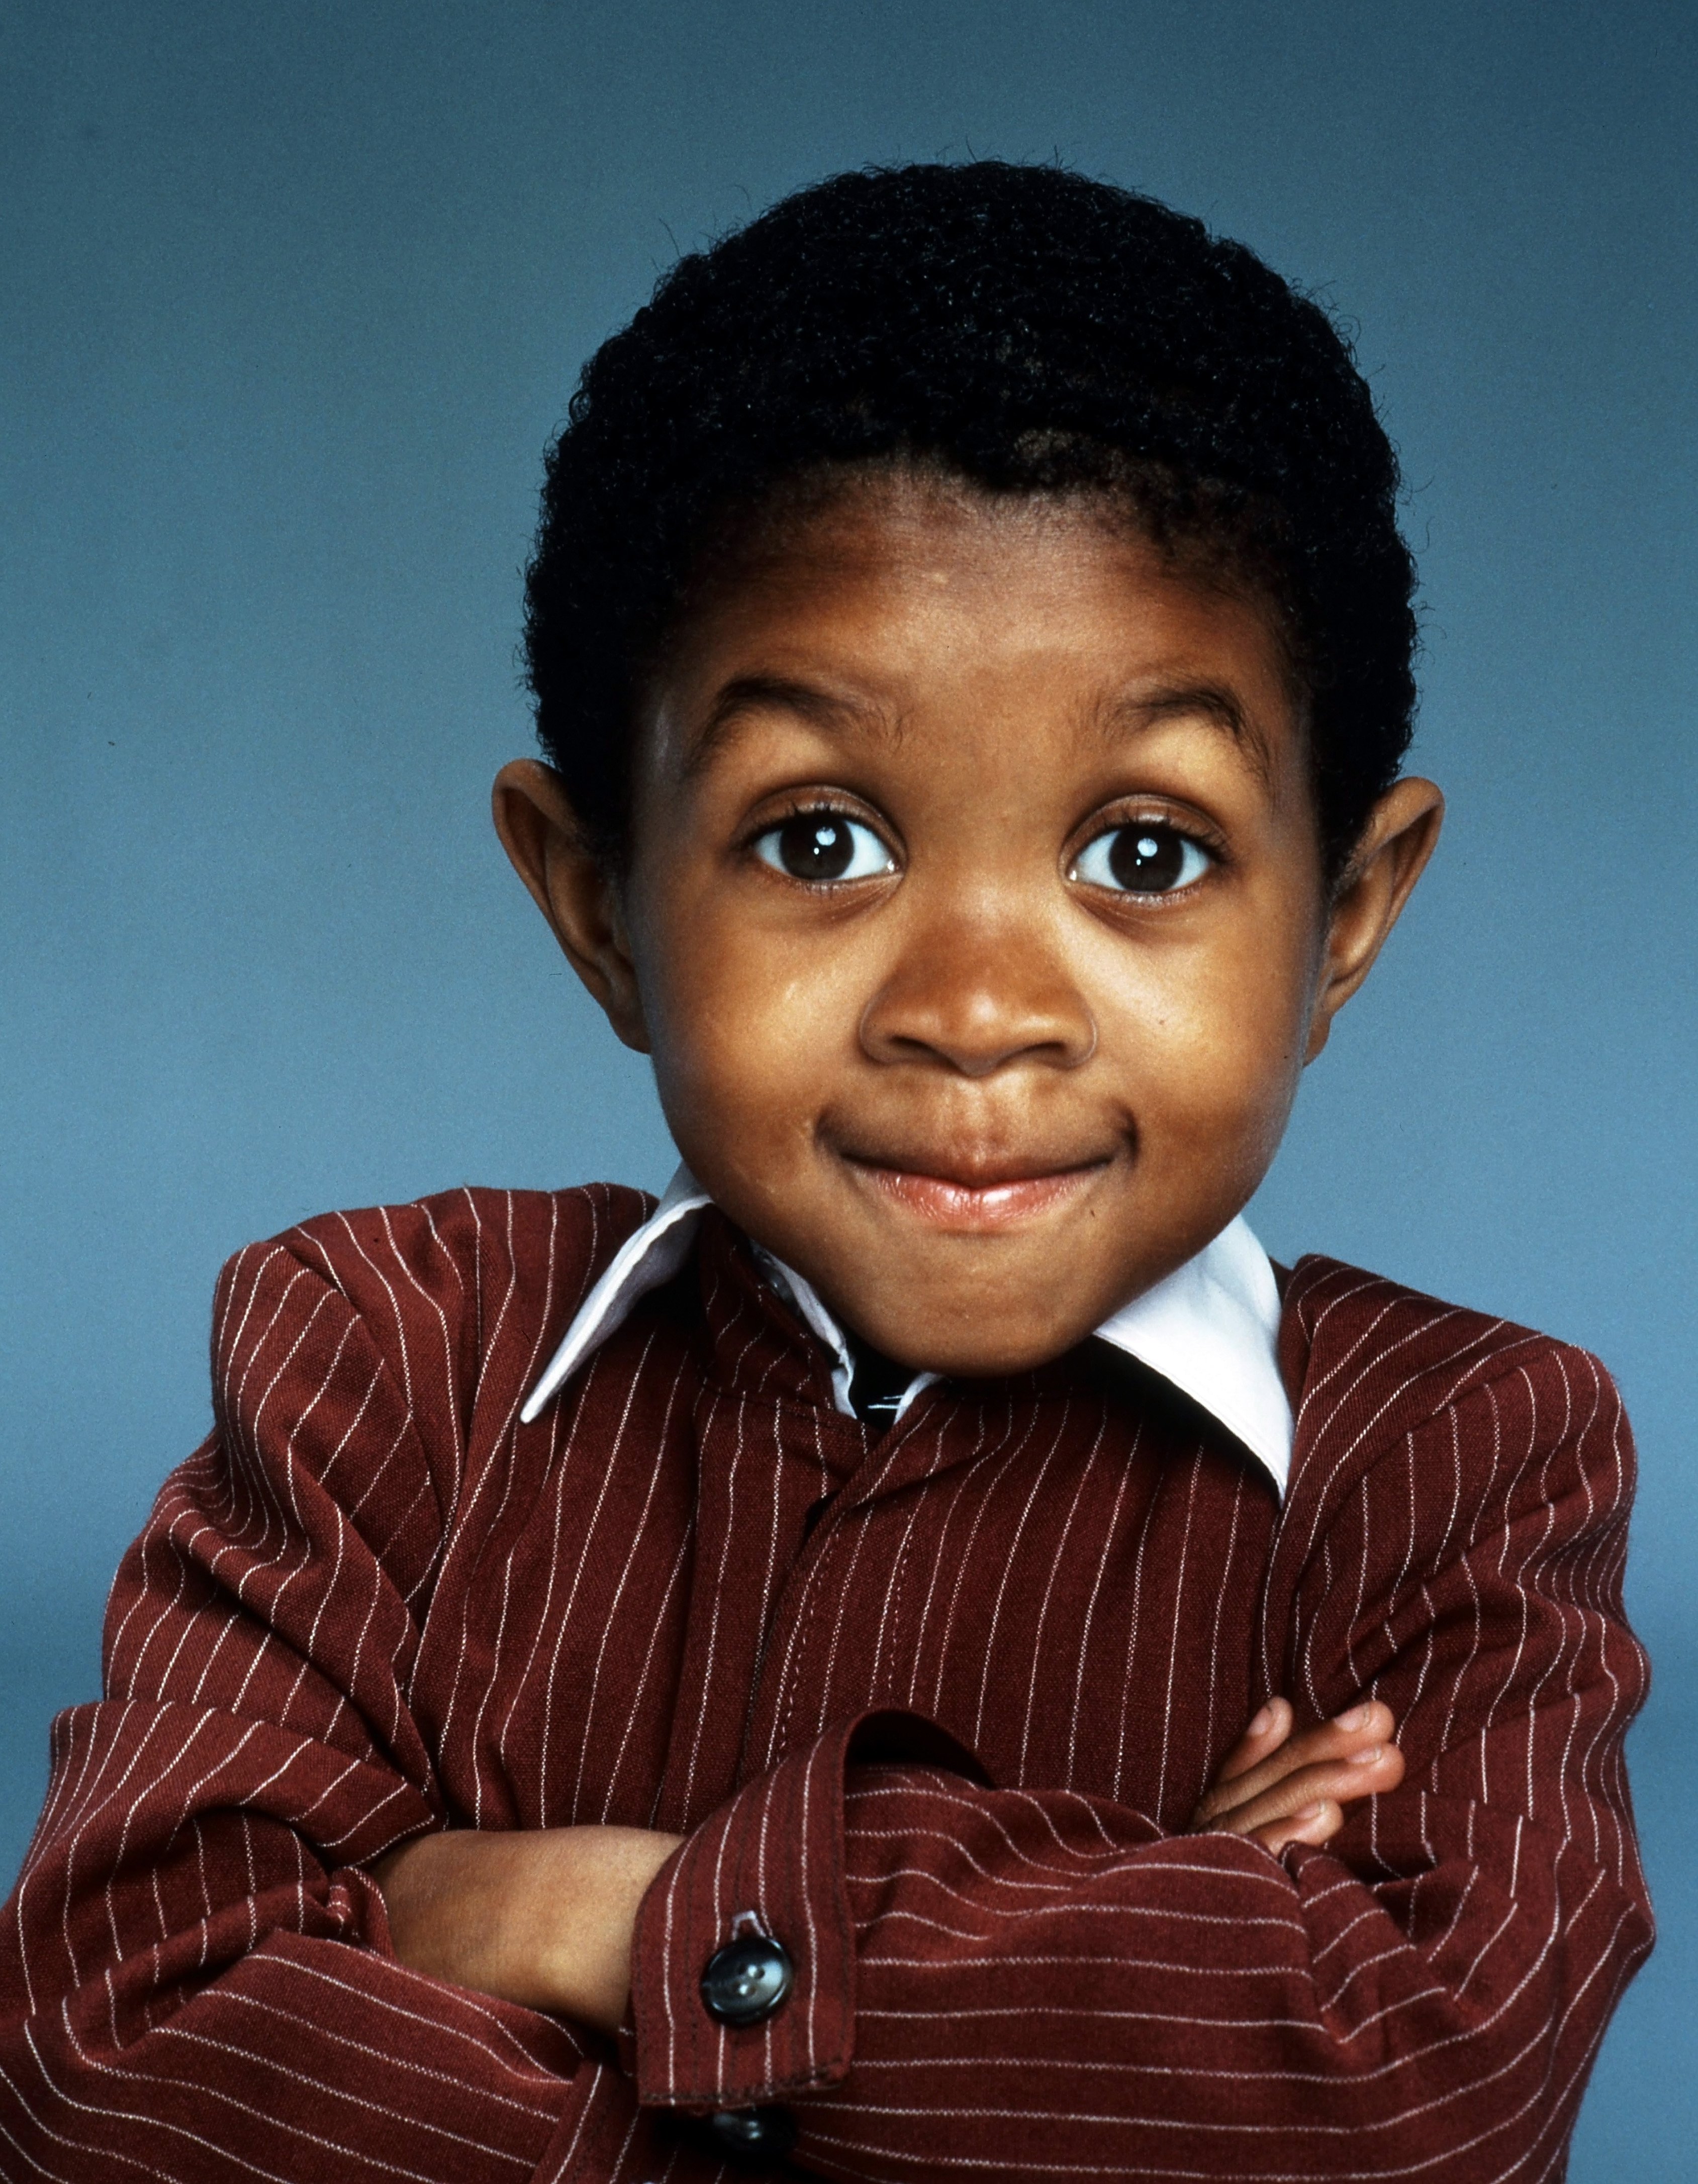 Actor Emmanuel Lewis poses for a portrait in circa 1984. | Photo: Getty Images